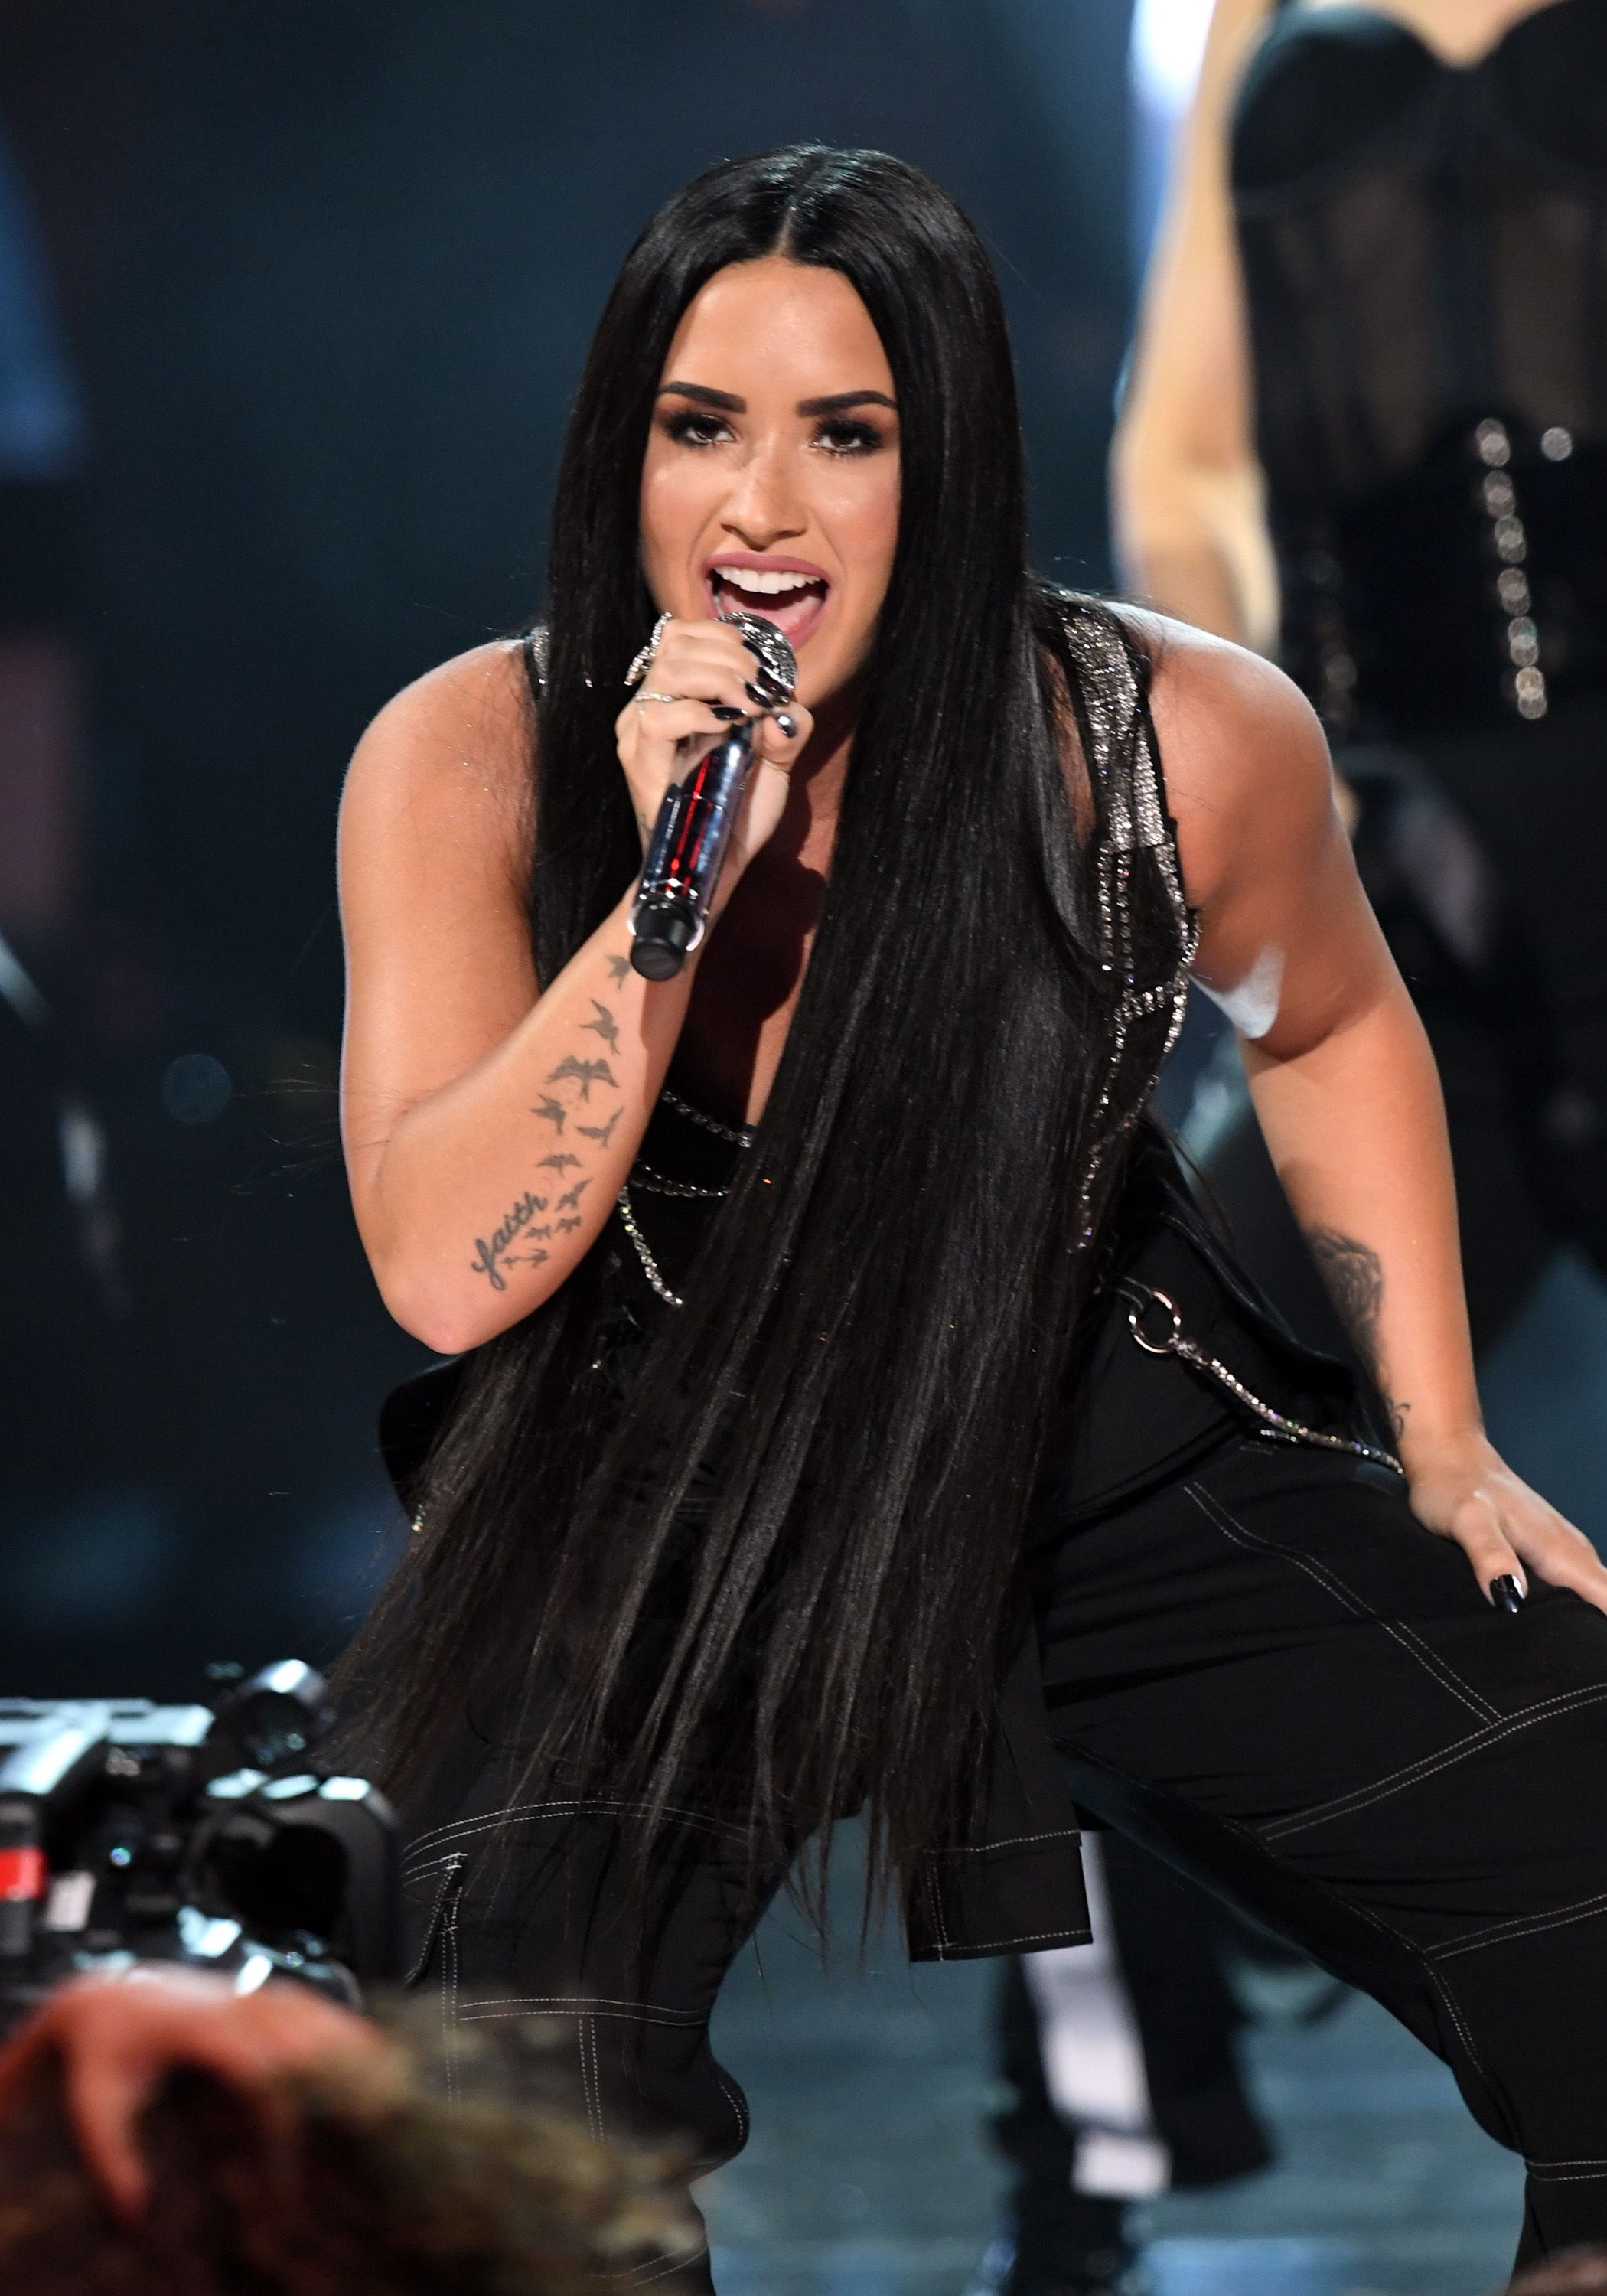 Demi Lovato S Performance Of Sorry Not Sorry At The Amas Is Bts Approved Demi Lovato Singing At American Music Awards